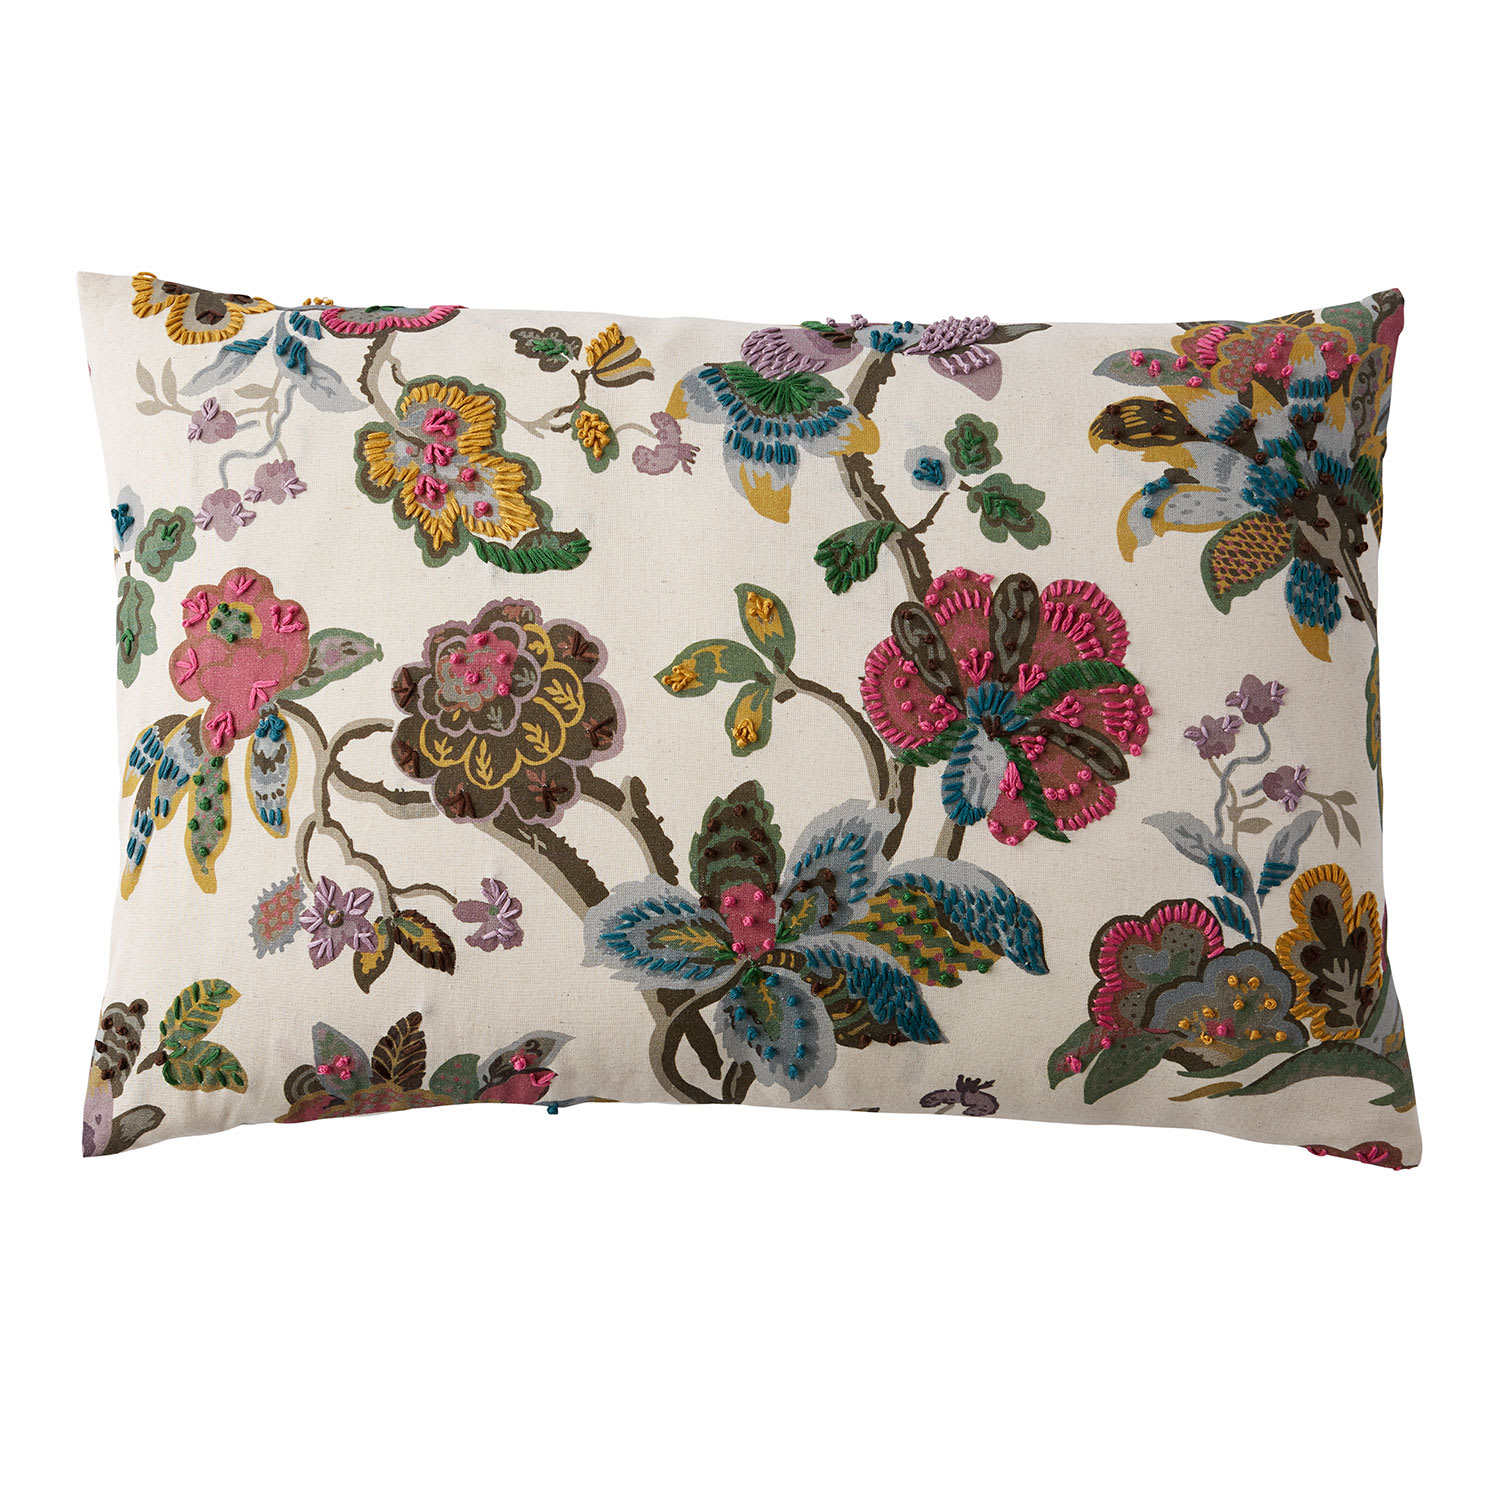 Red Multicolored Floral Embroidered Pillow Cover - Embroidered Floral